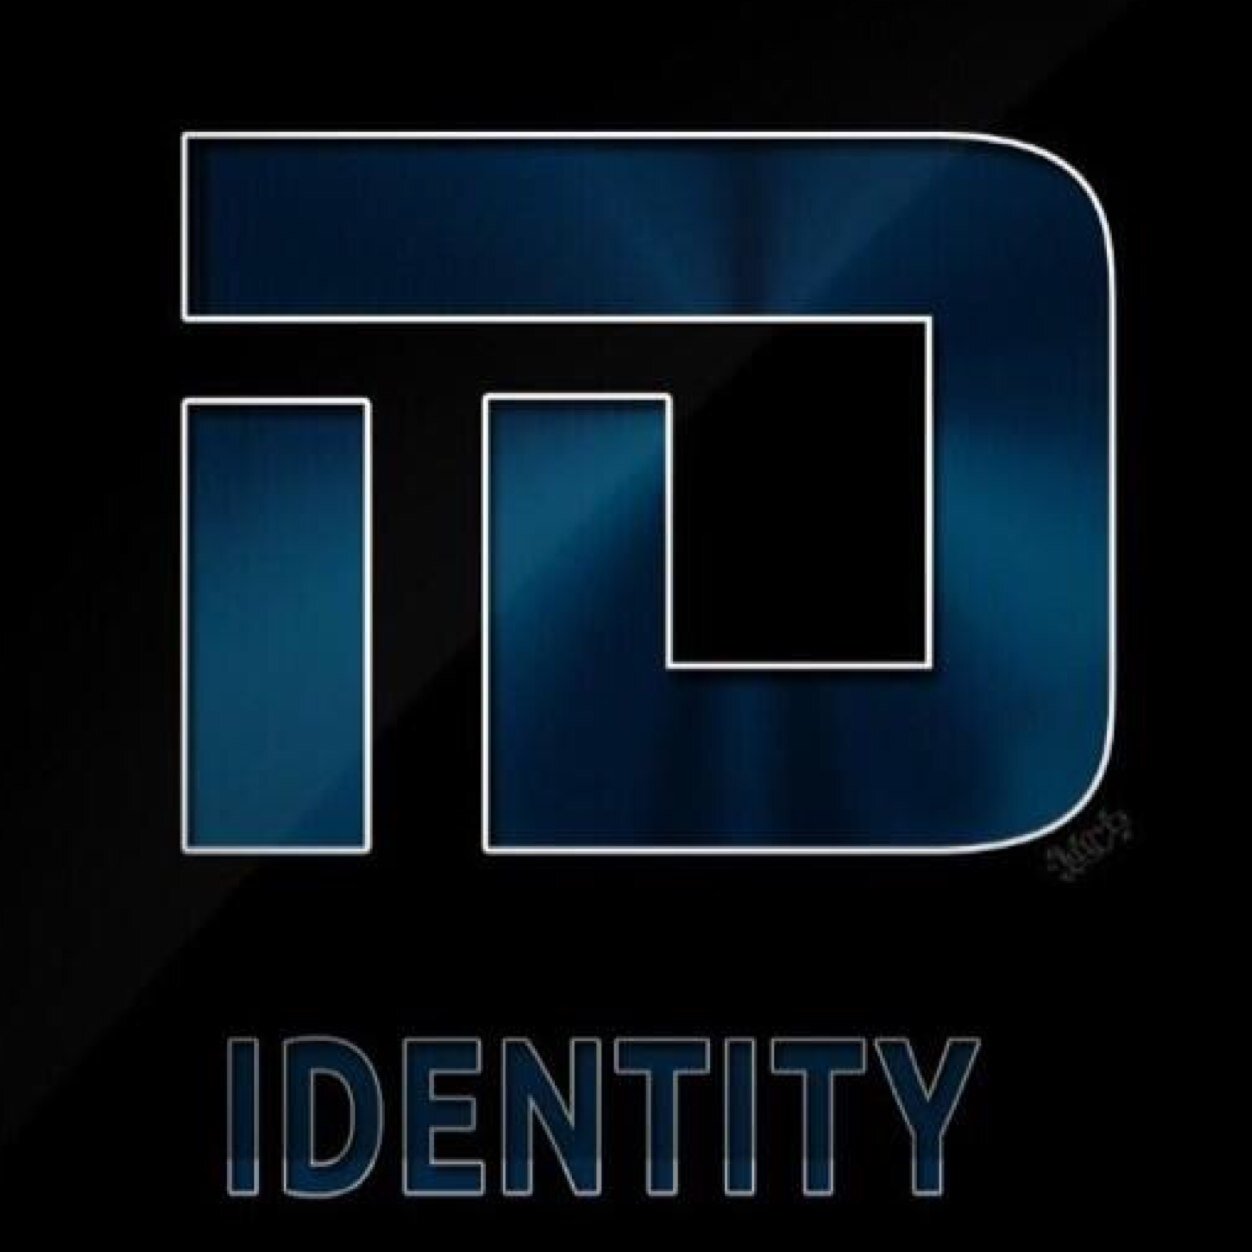 Team Identity. Roster: @React_ID @i_RisKey @Canon2237. Thrive to be the best. The Grind Never Ends. Xbox 360. CoD Ghost.